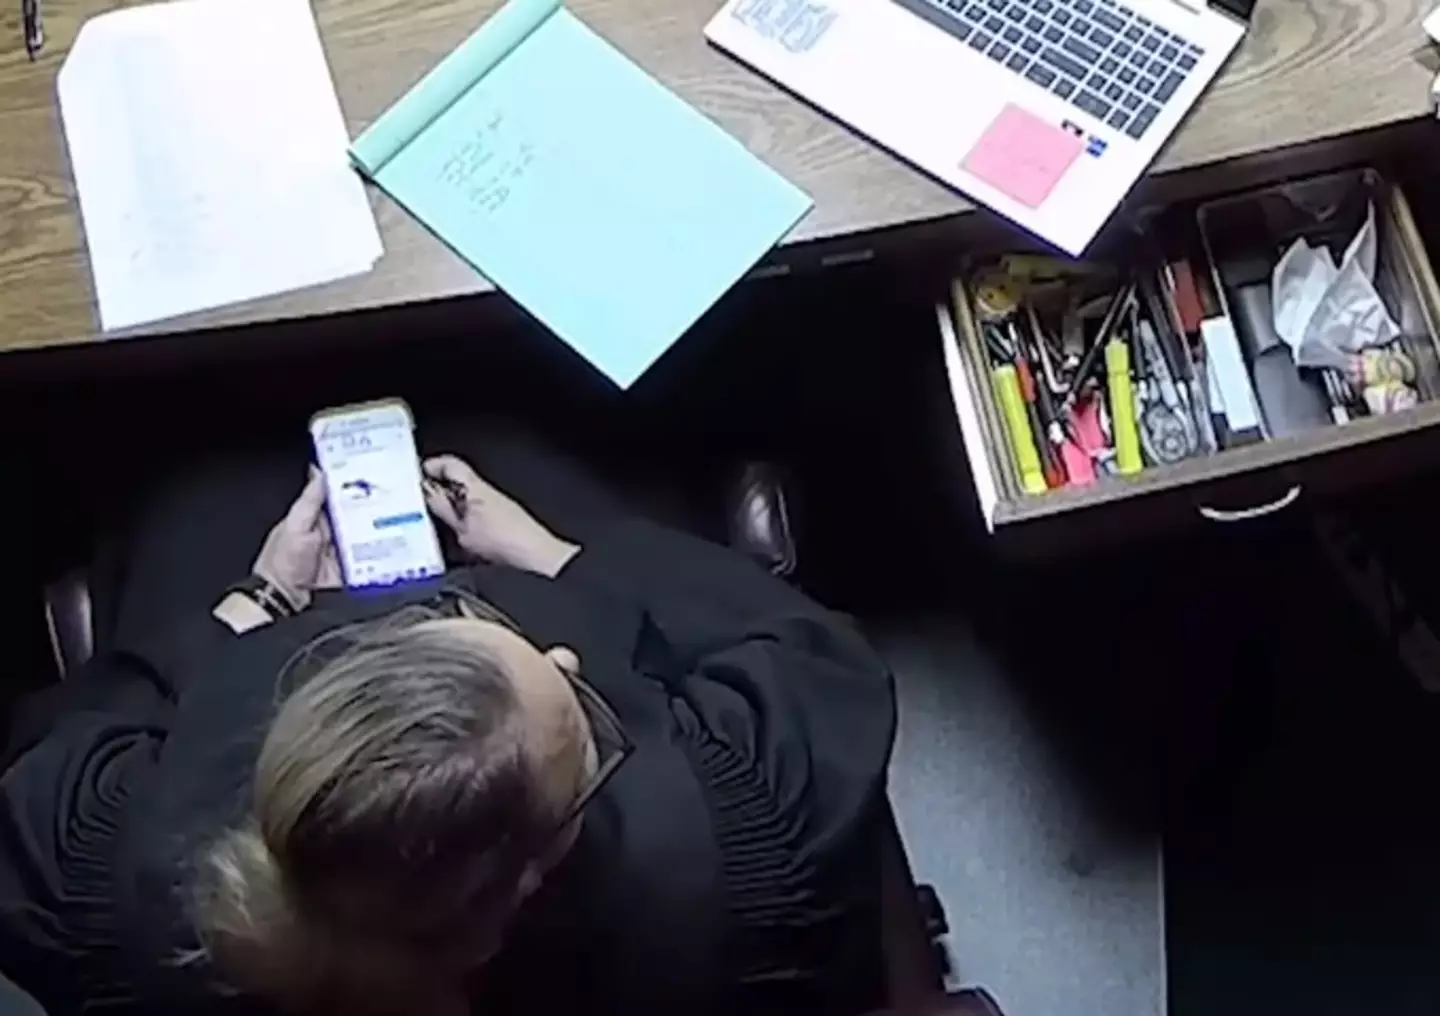 Judge Traci Soderstrom was filmed using her phone during a trial.